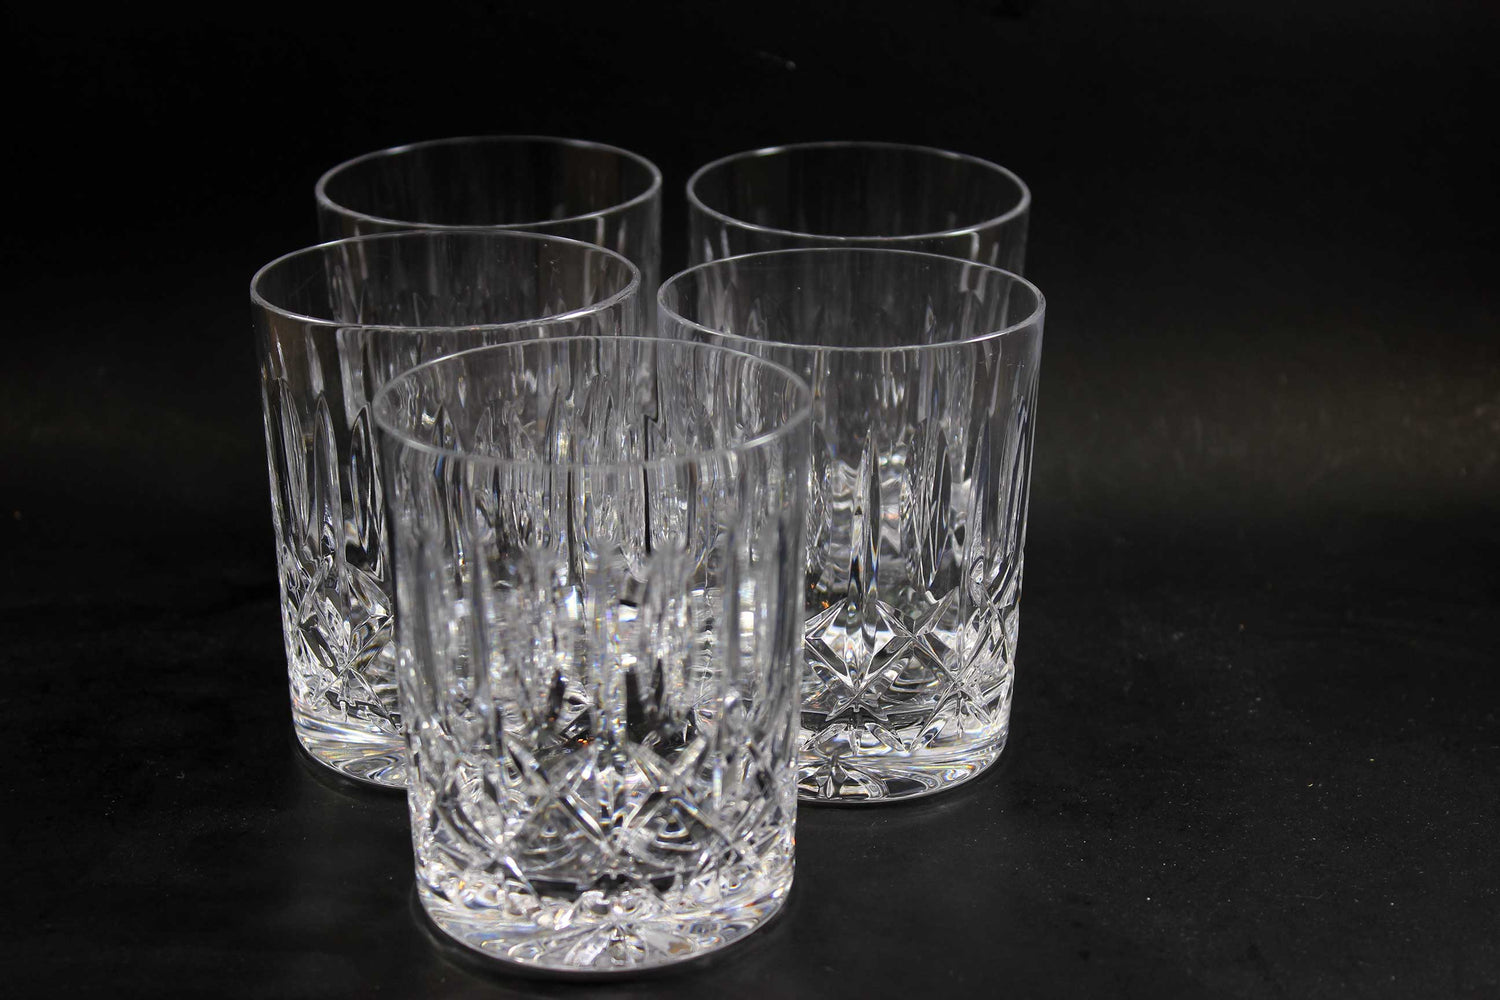 Cross and Olive, Old Fashion/Whiskey Glasses